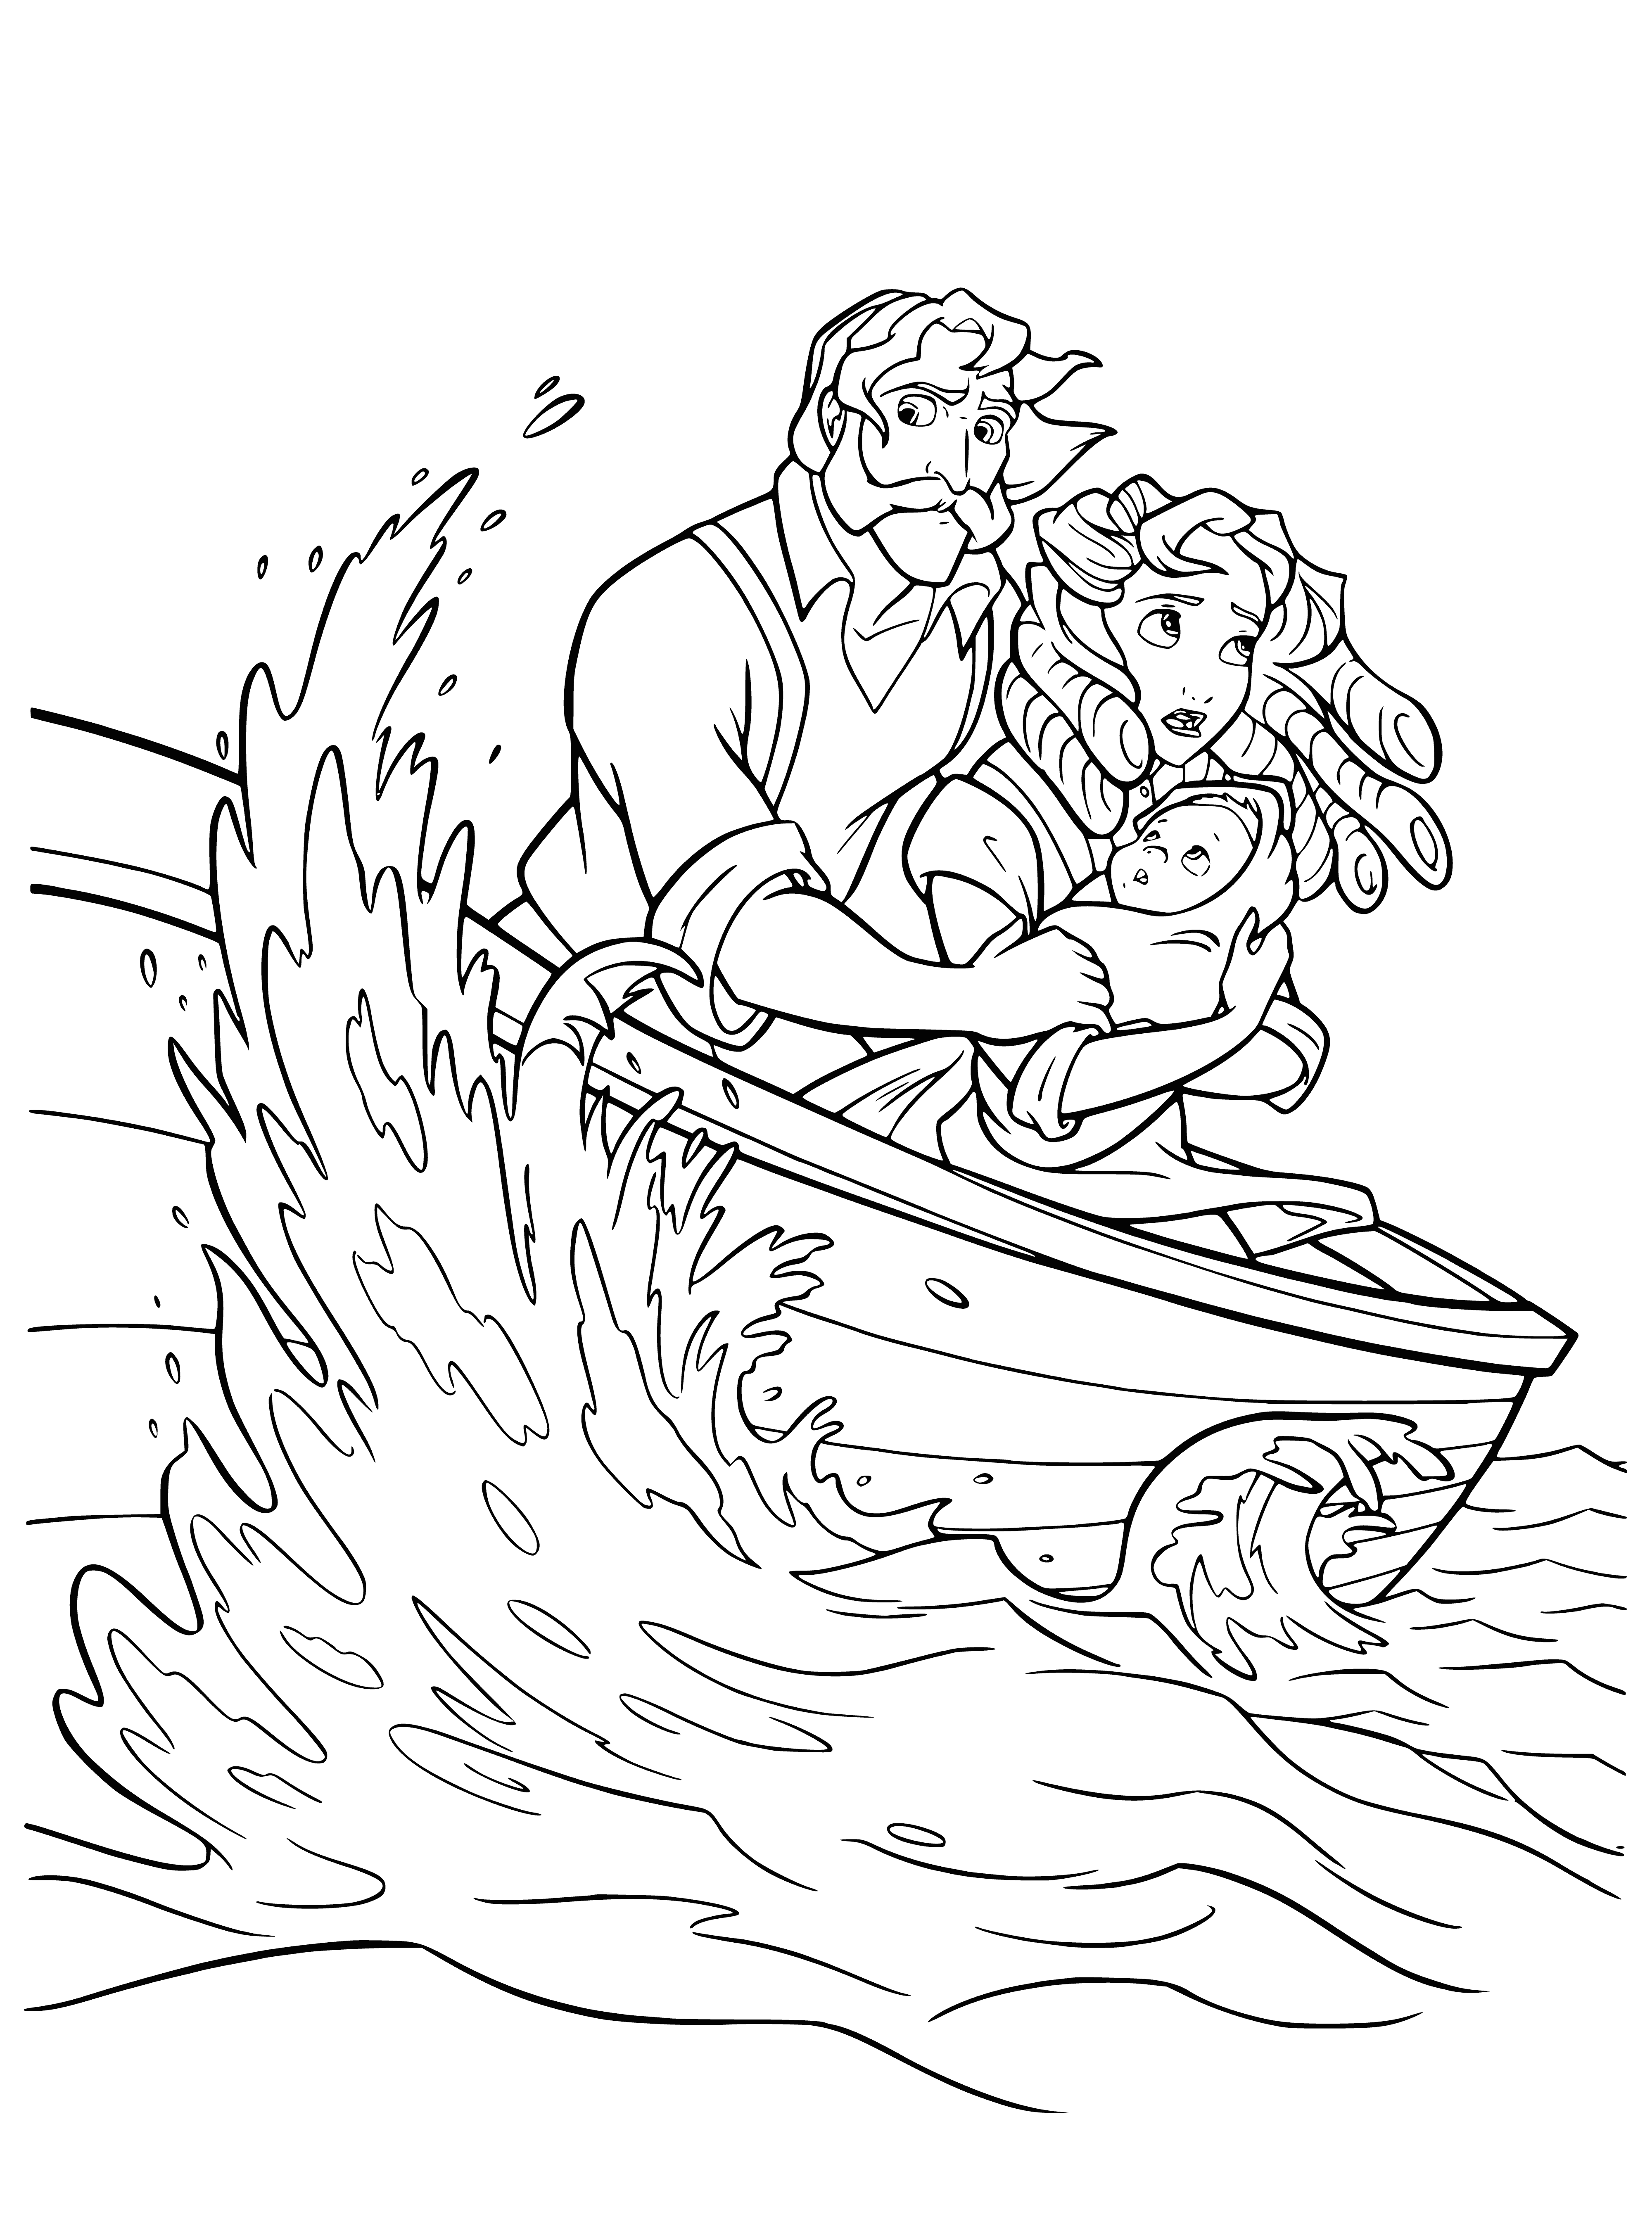 Shipwreck coloring page